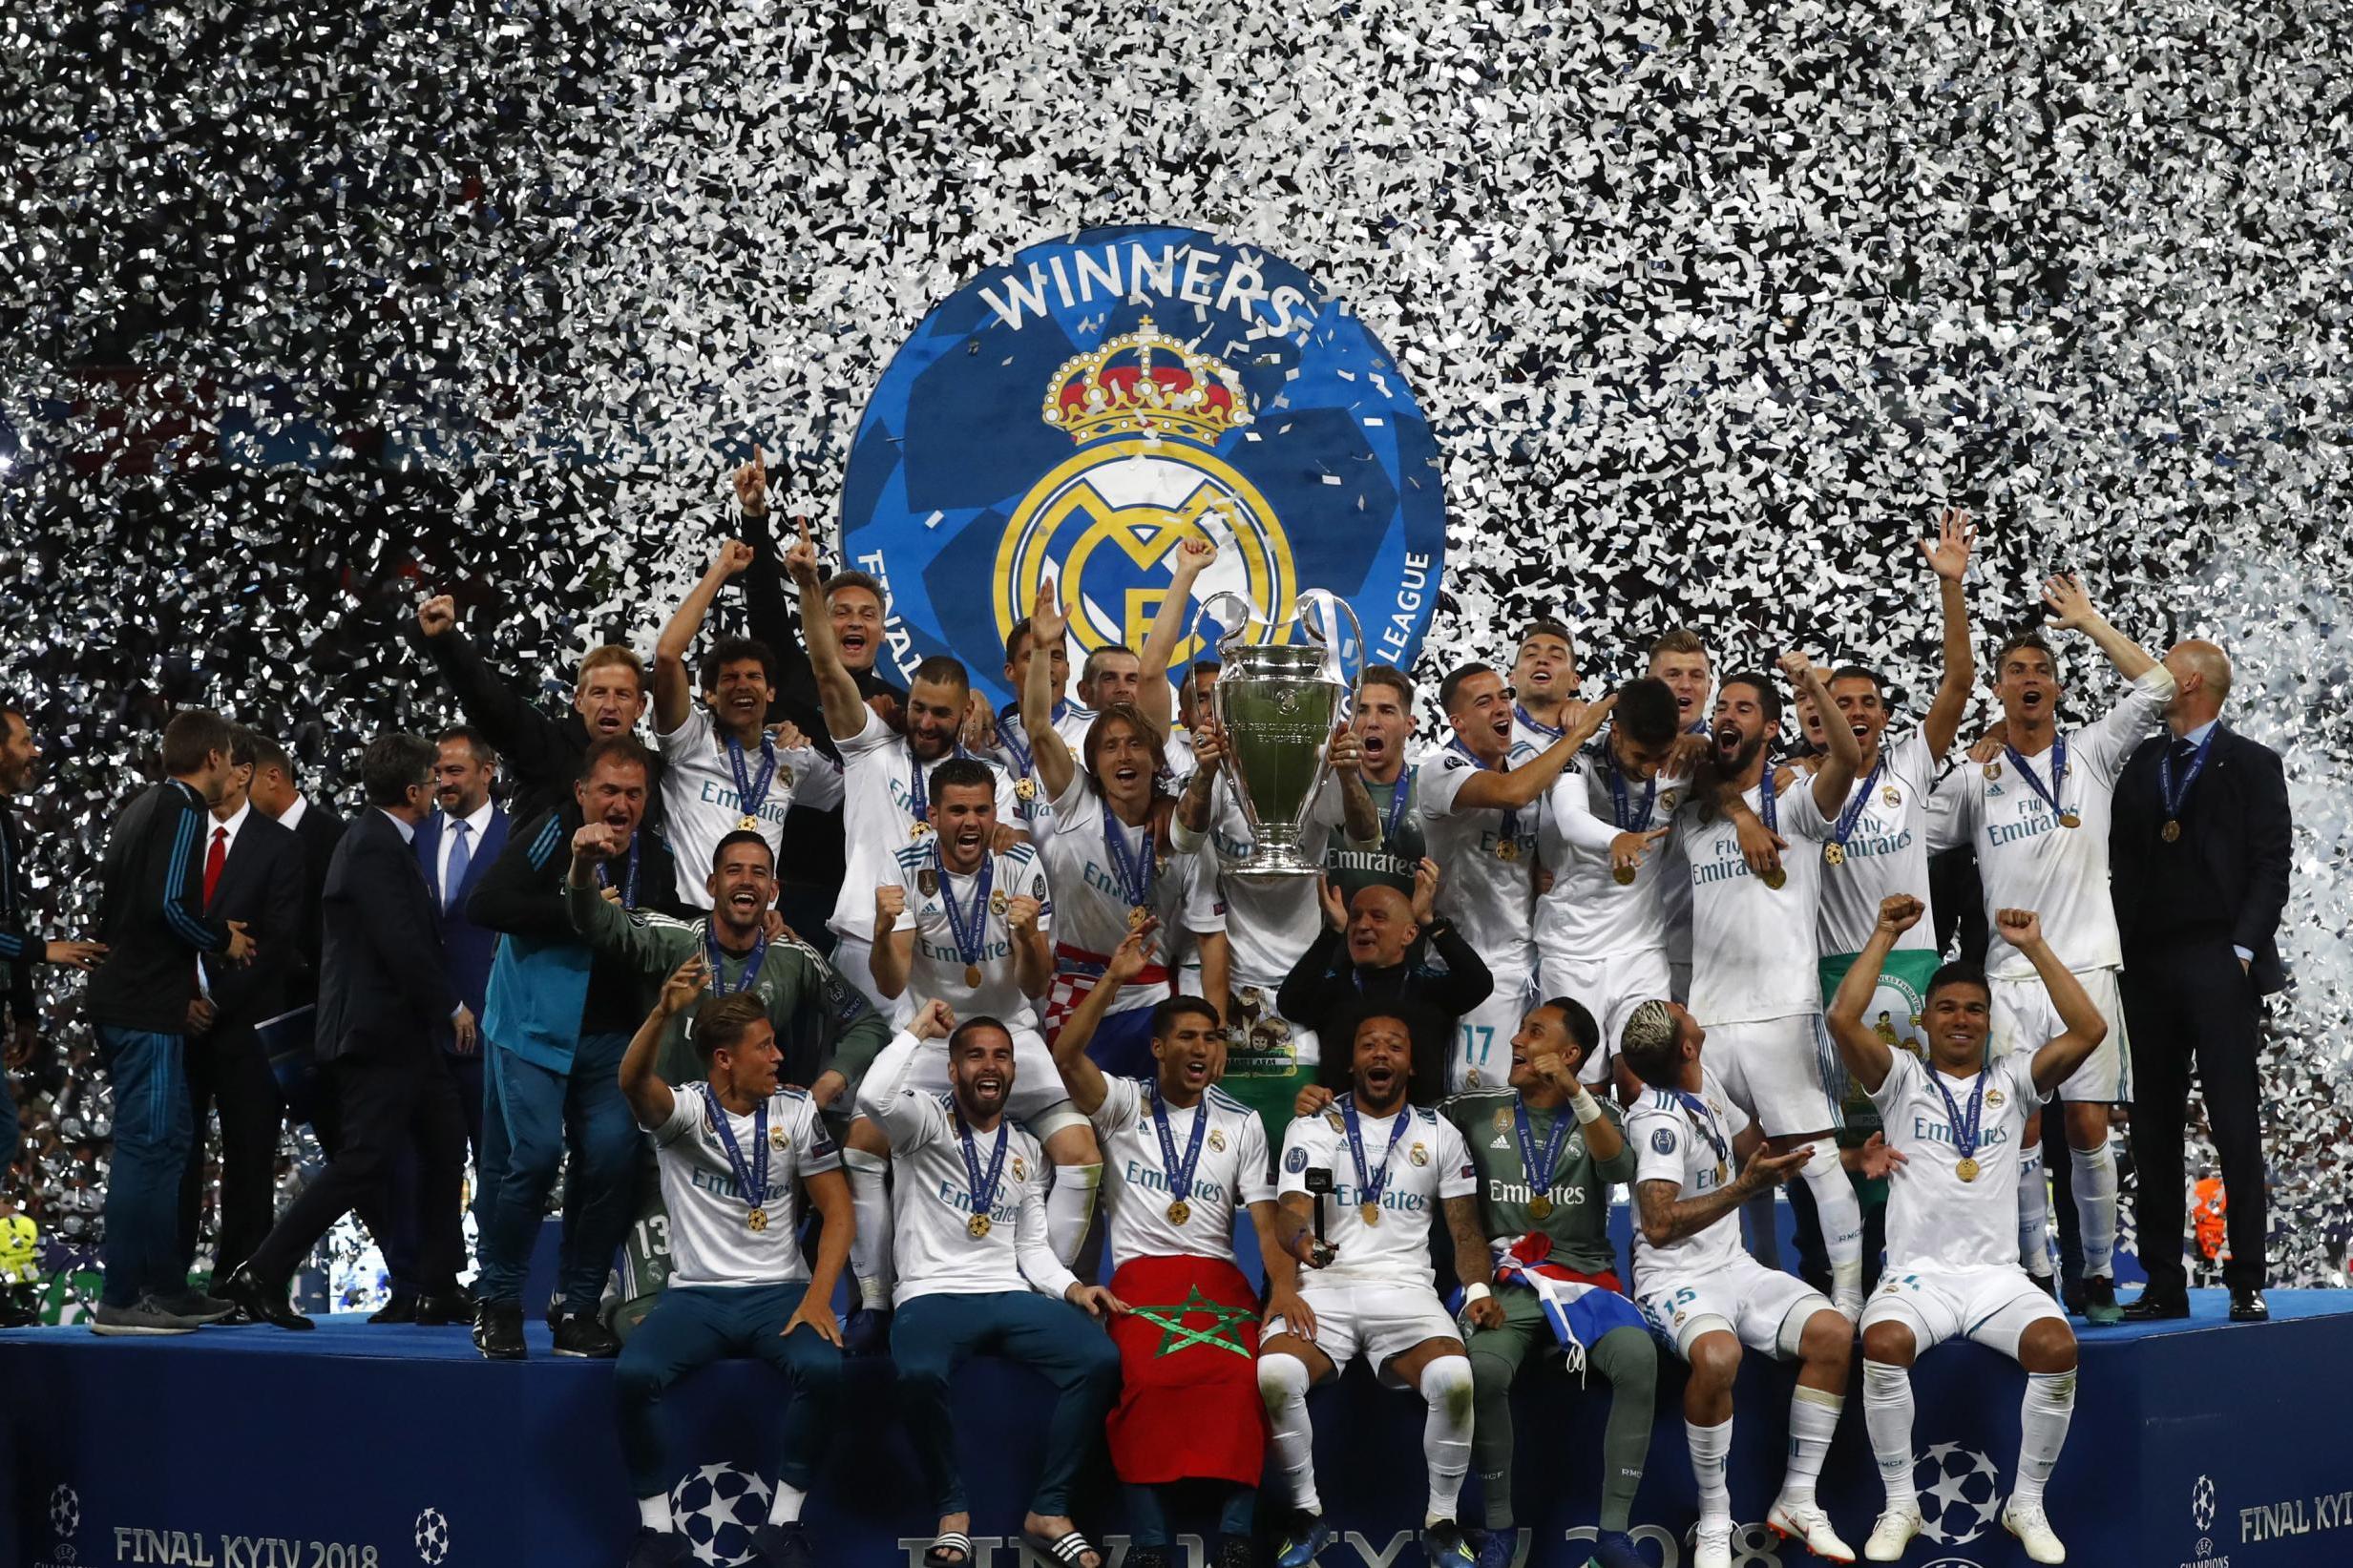 203210969 real madrid players celebrate with trophy after winning the champions league final soccer Manchester City is the favourite to win the 2018-19 UEFA Champions League